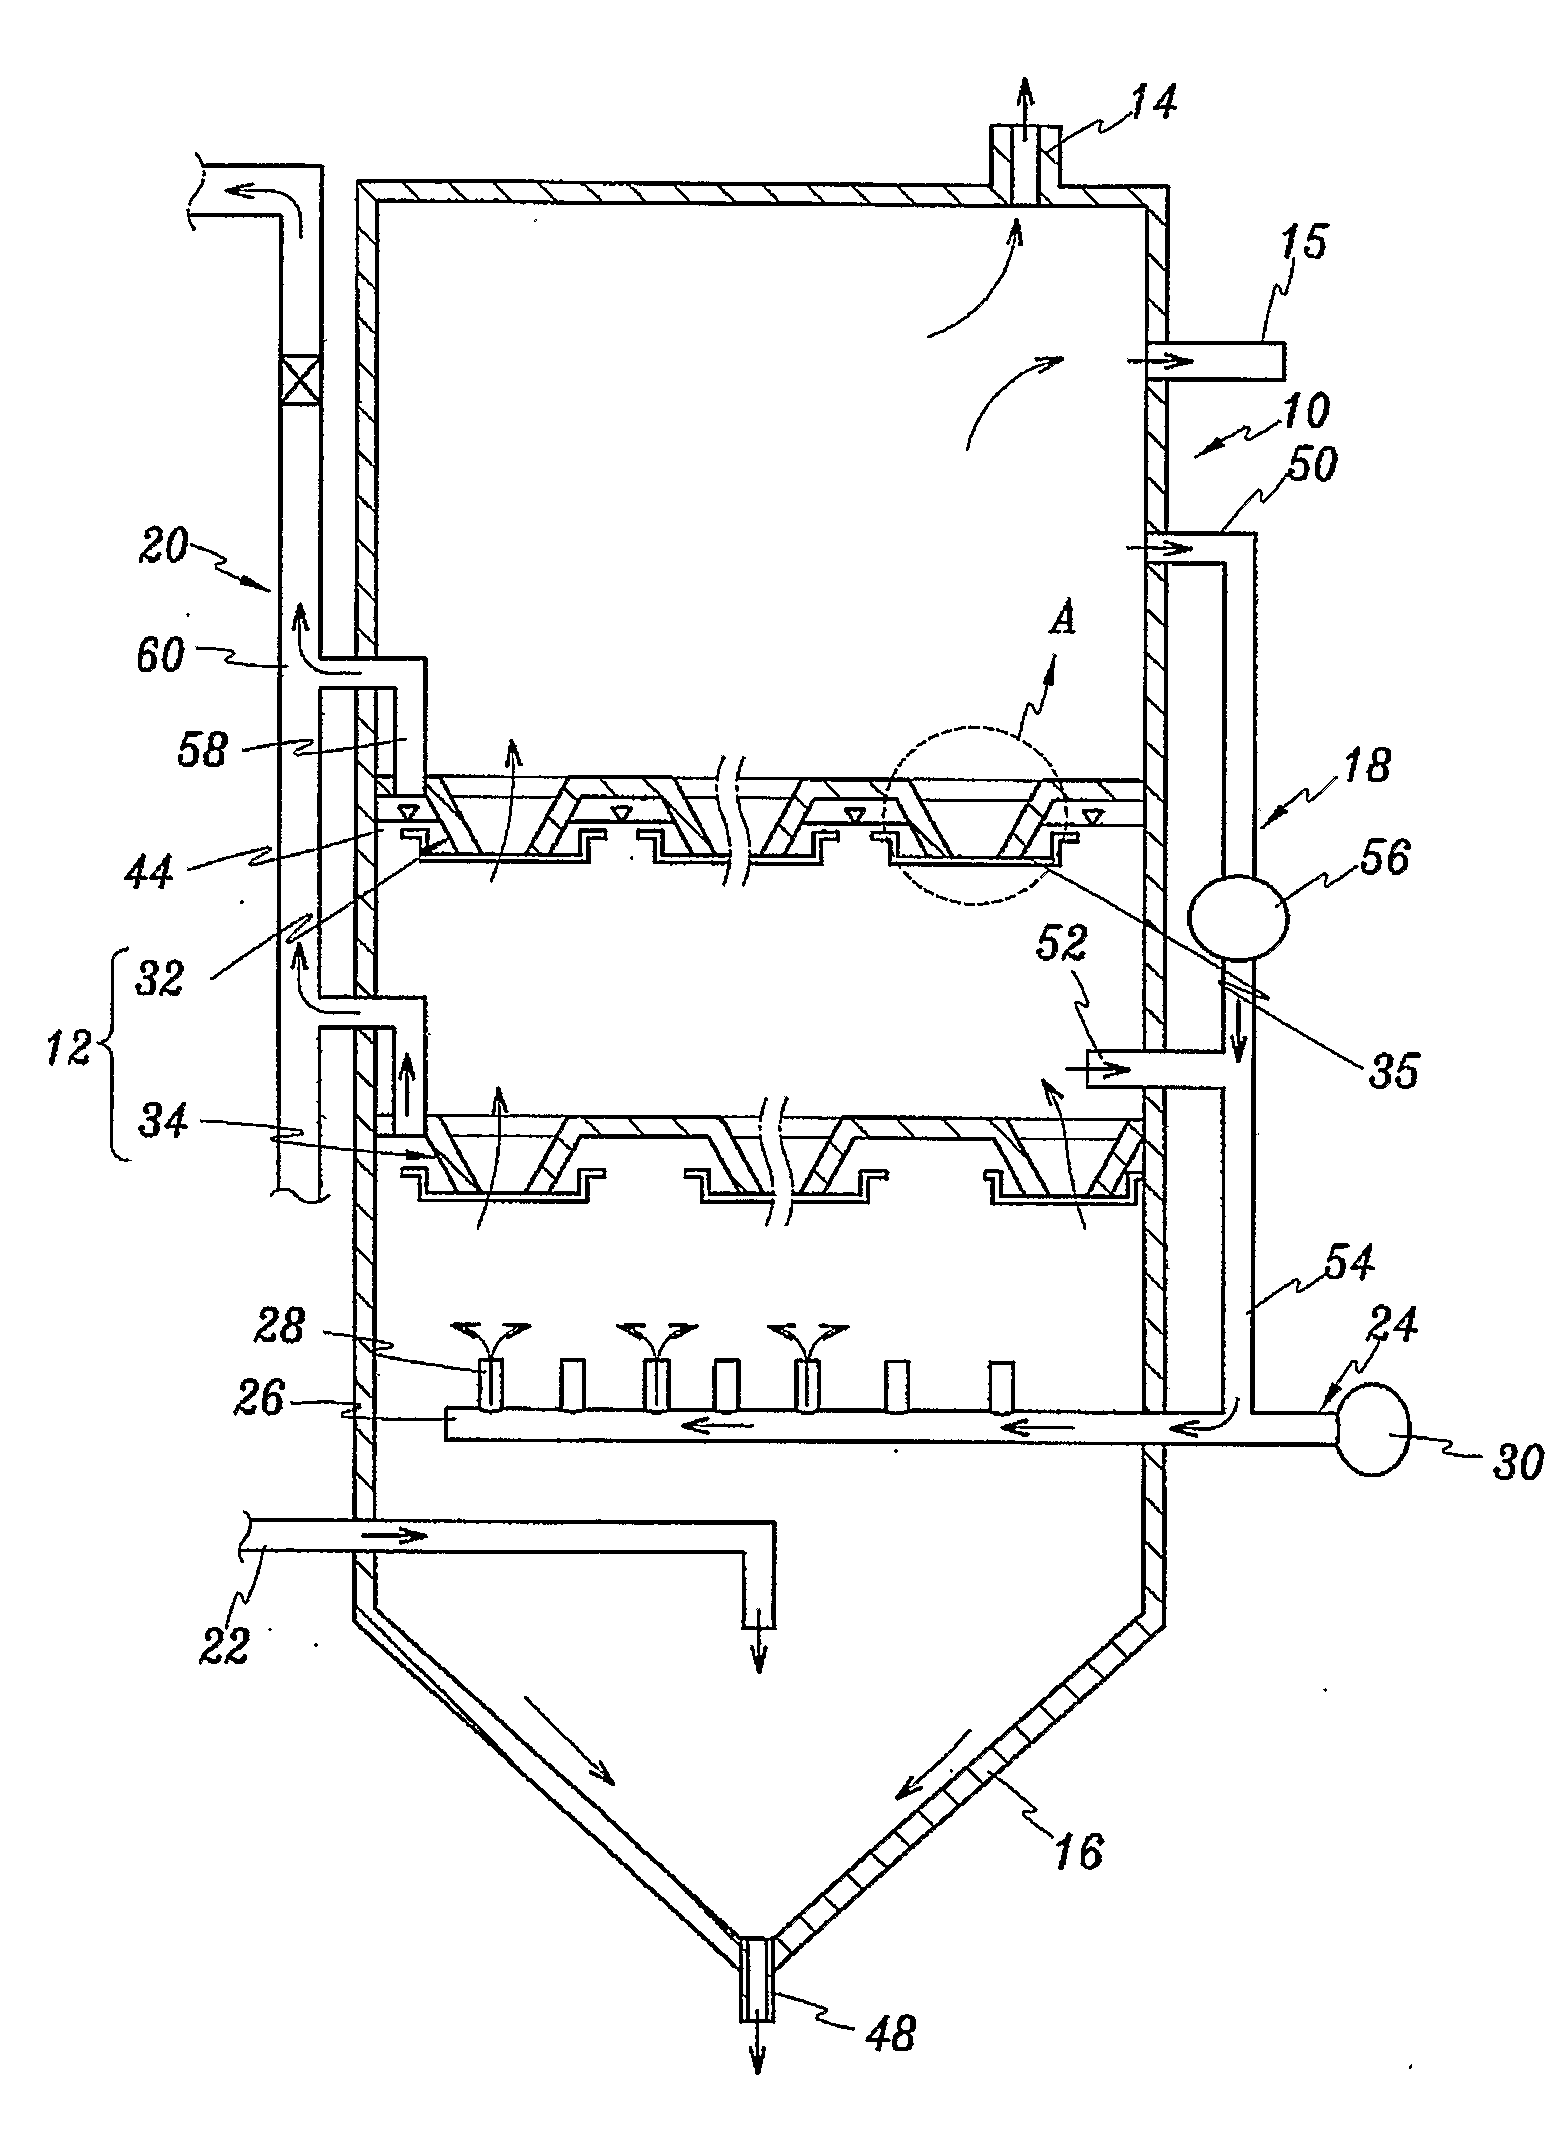 Fluids Fluxion Method and Plant for Wastewater Treatment